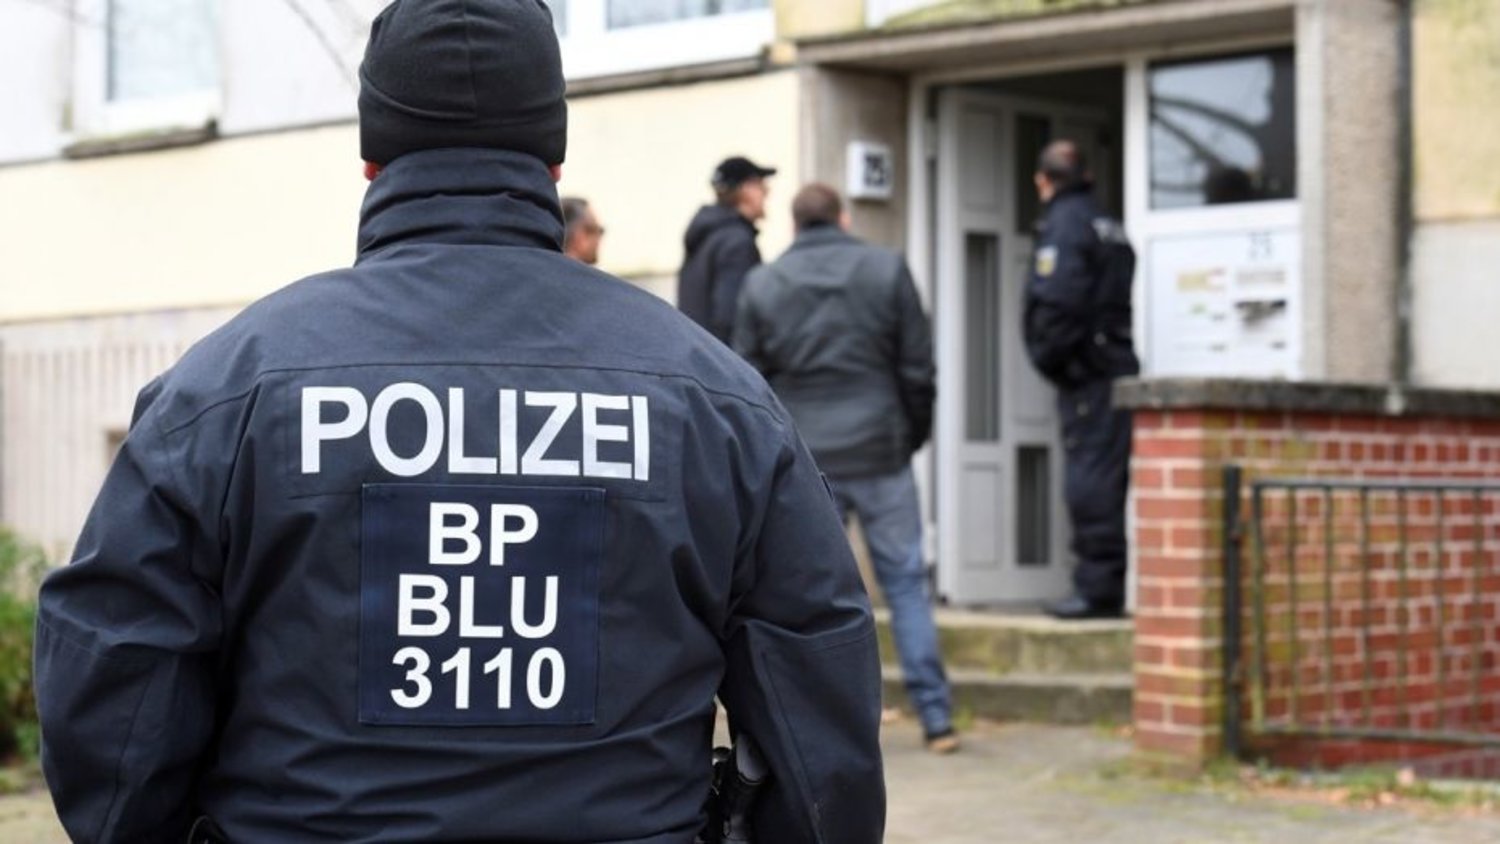 German police carried out raids against suspected Iranian spies. (Reuters)